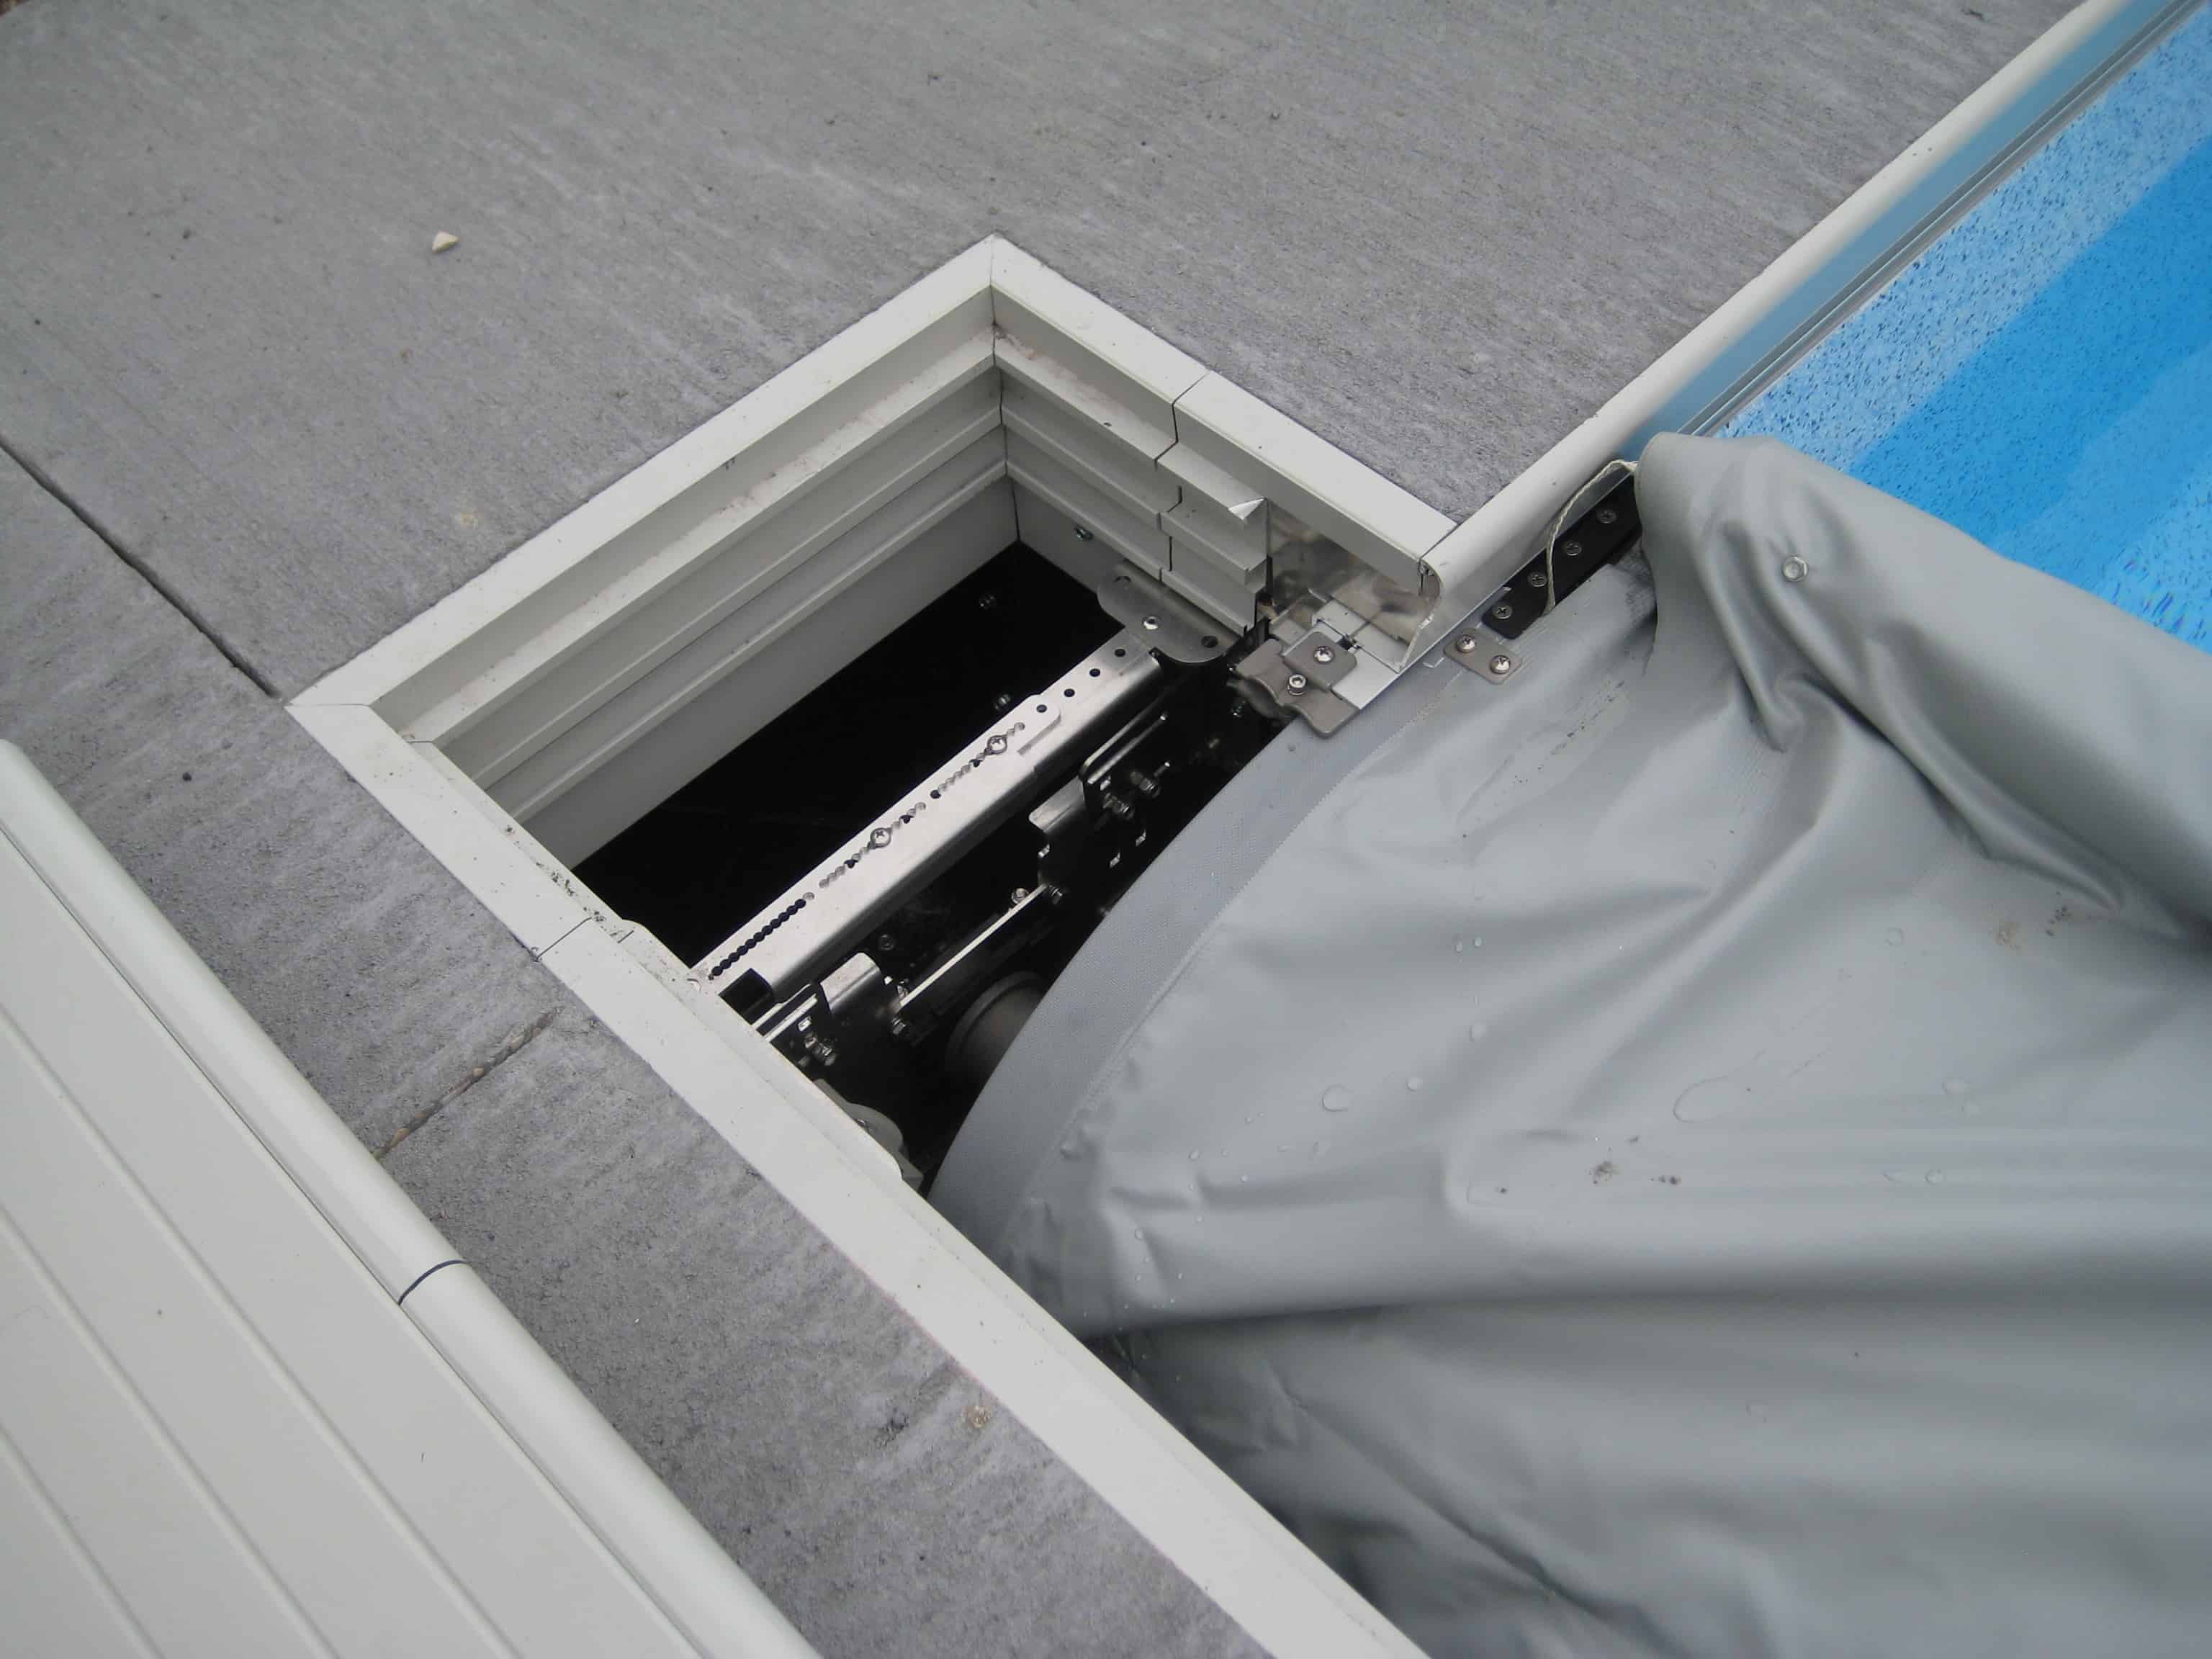 automatic pool cover with ozone